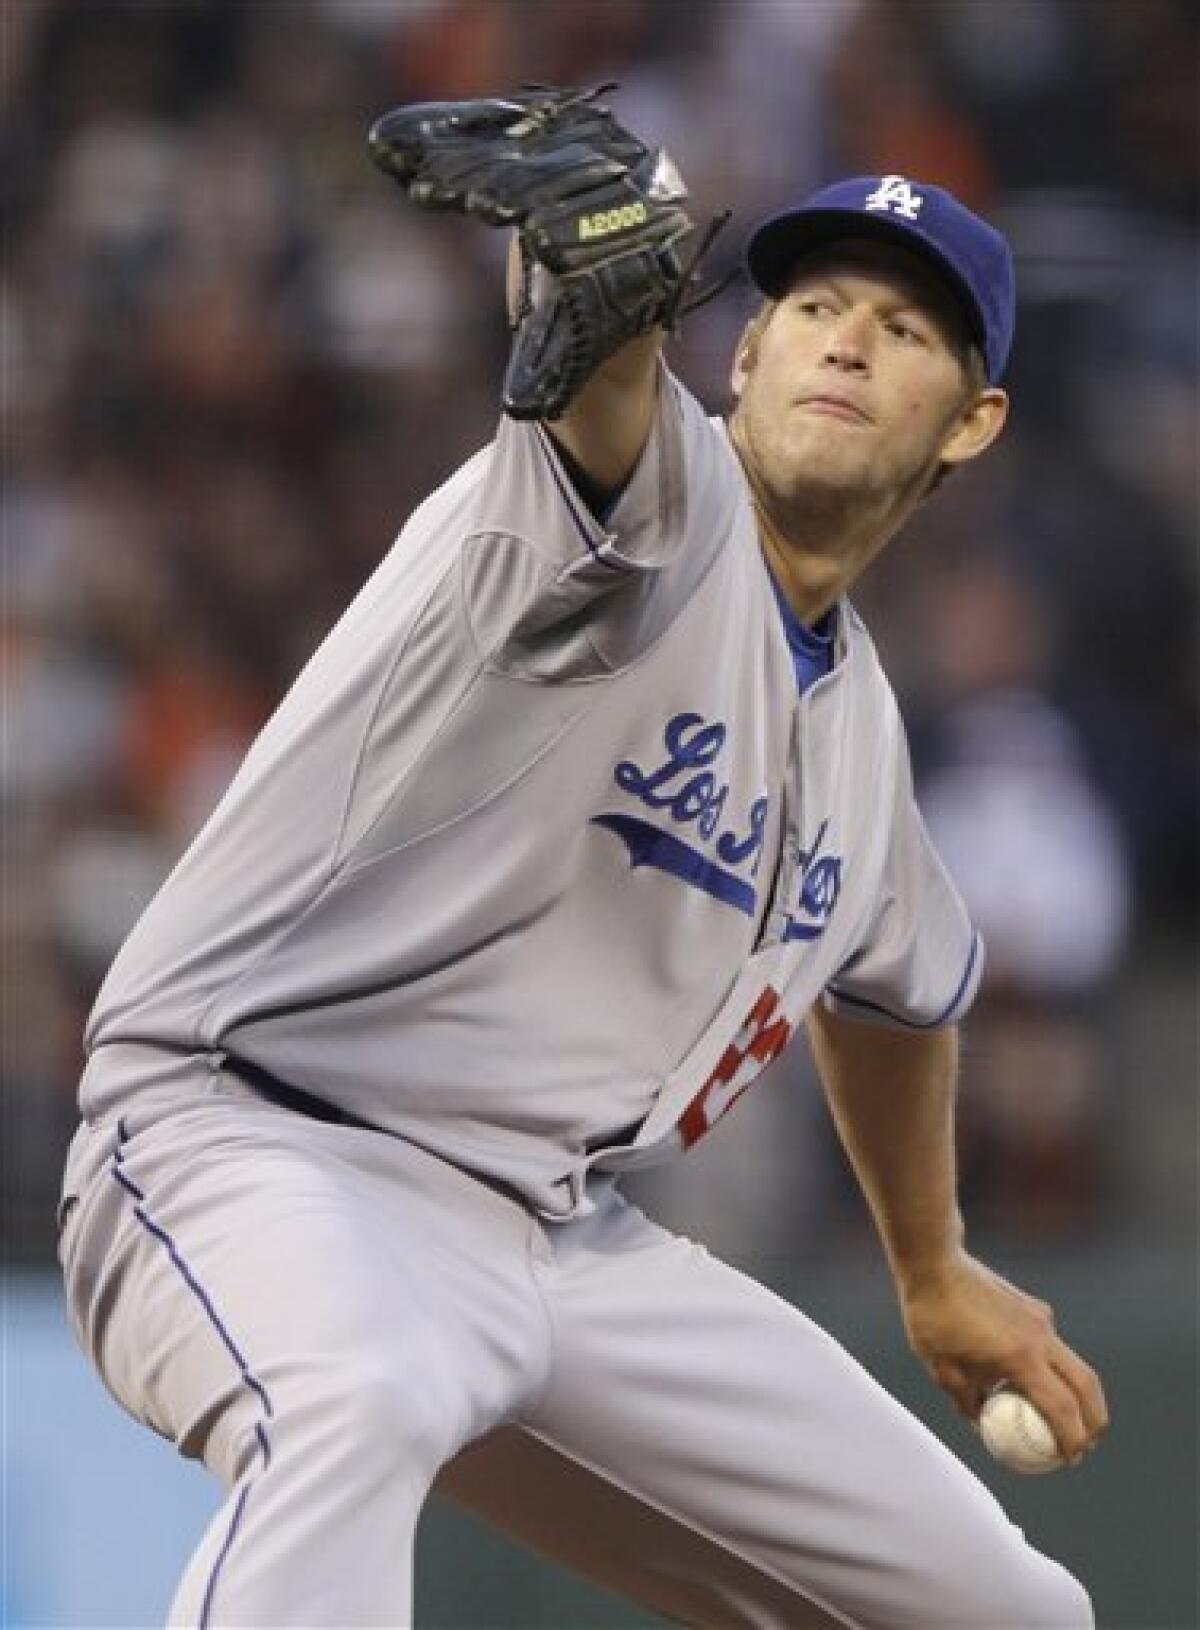 Kershaw heads to the disabled list